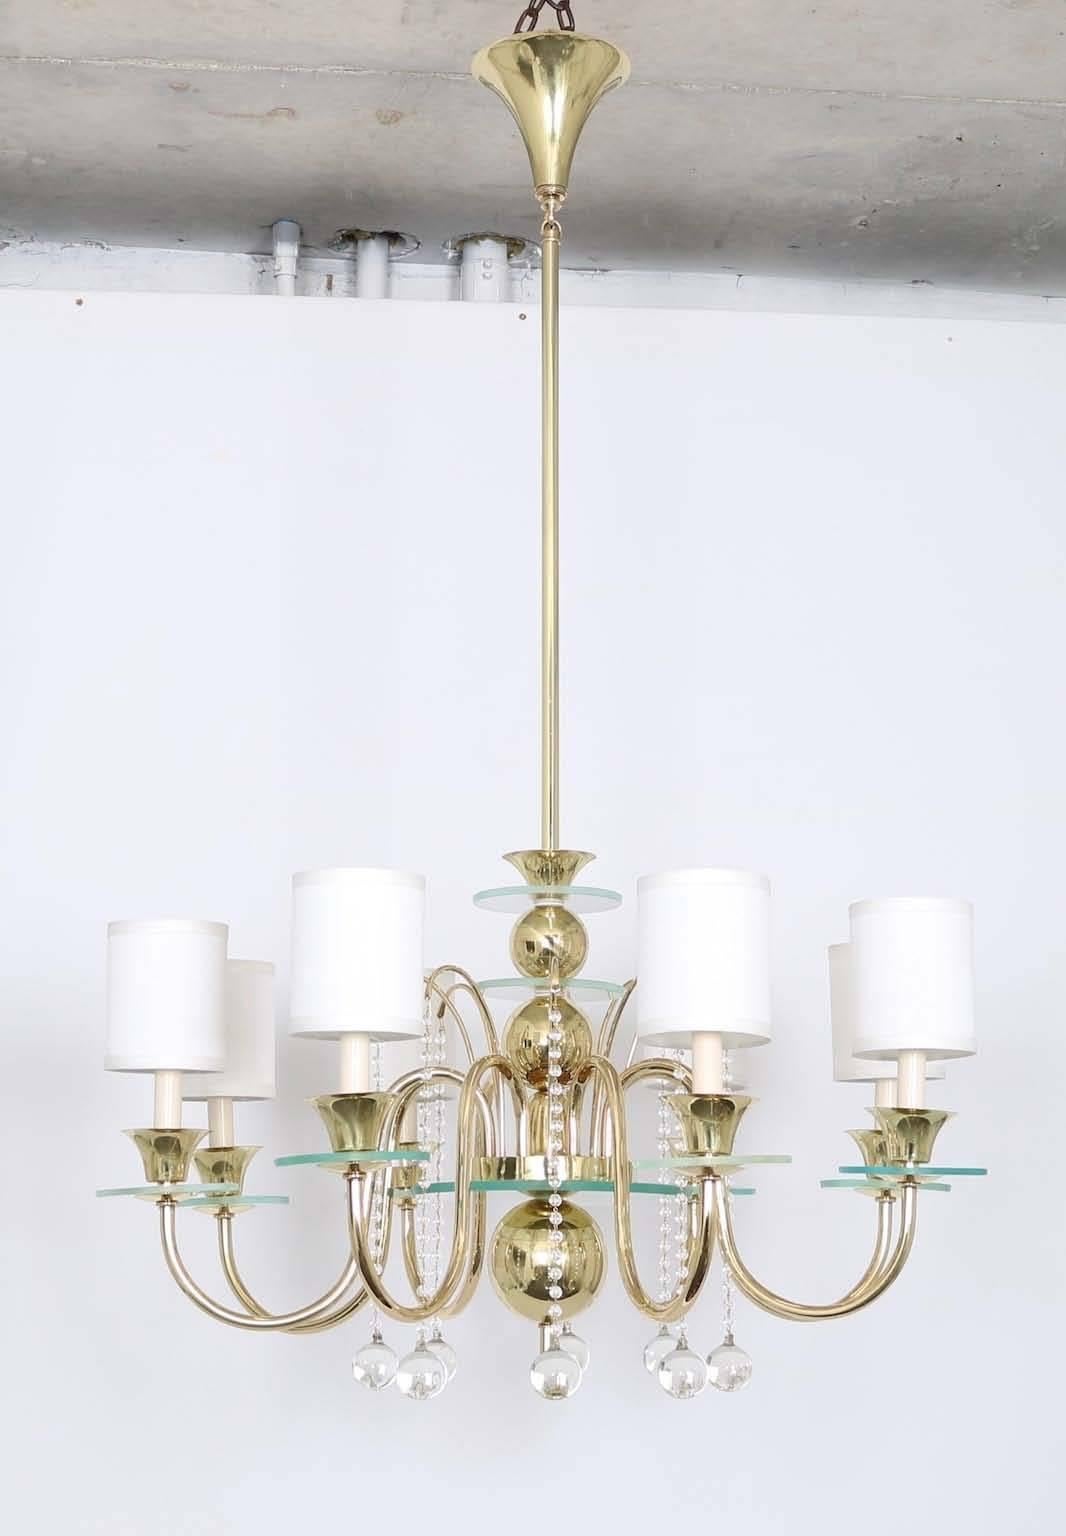 A fully restored circa 1950s chandelier, designed in the manner of Tommi Parzinger, stylistically streamline moderne, brass frame with stacked ball motif and tapered conical forms, eight lights on curved scroll arms, with decorative glass bobeches,